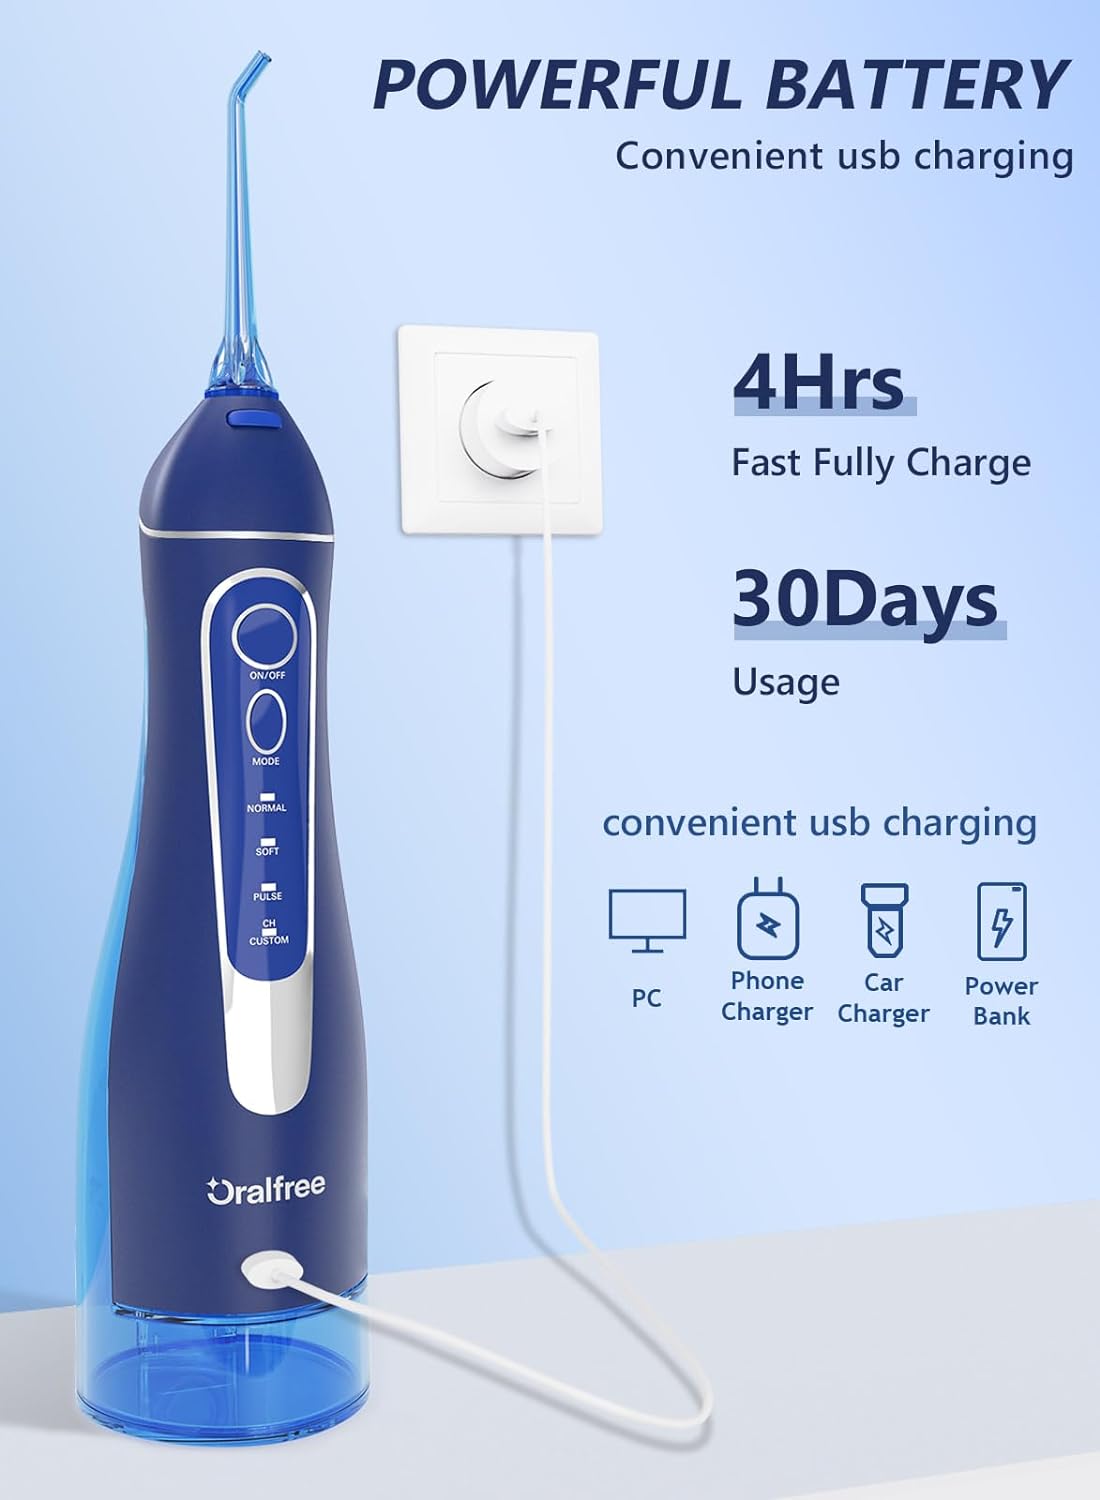 Water Dental Flosser Cordless for Teeth Cleaning - 4 Modes Oral Irrigator 300ML Braces Flossers Cleaner, Rechargeable Portable IPX7 Waterproof Powerful Battery for Travel Home